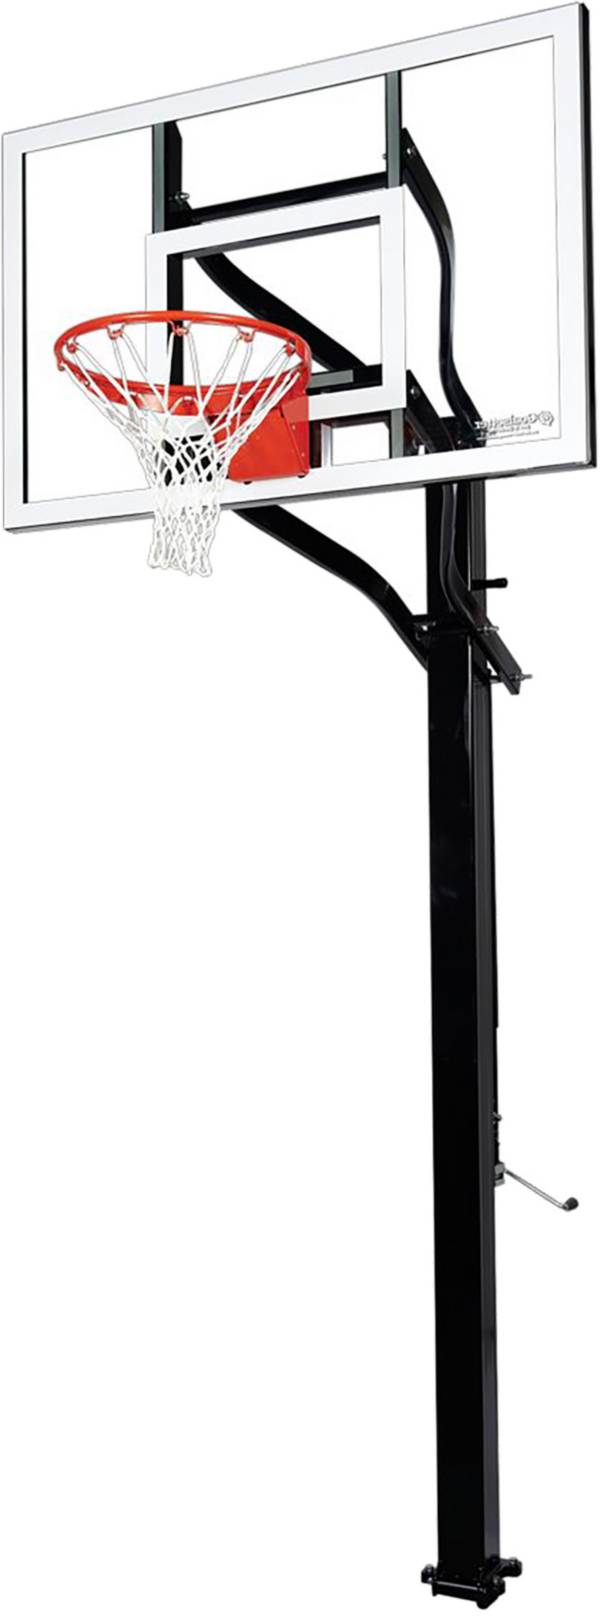 Goalsetter X672 72” Extreme Series Glass In-Ground Basketball Hoop product image